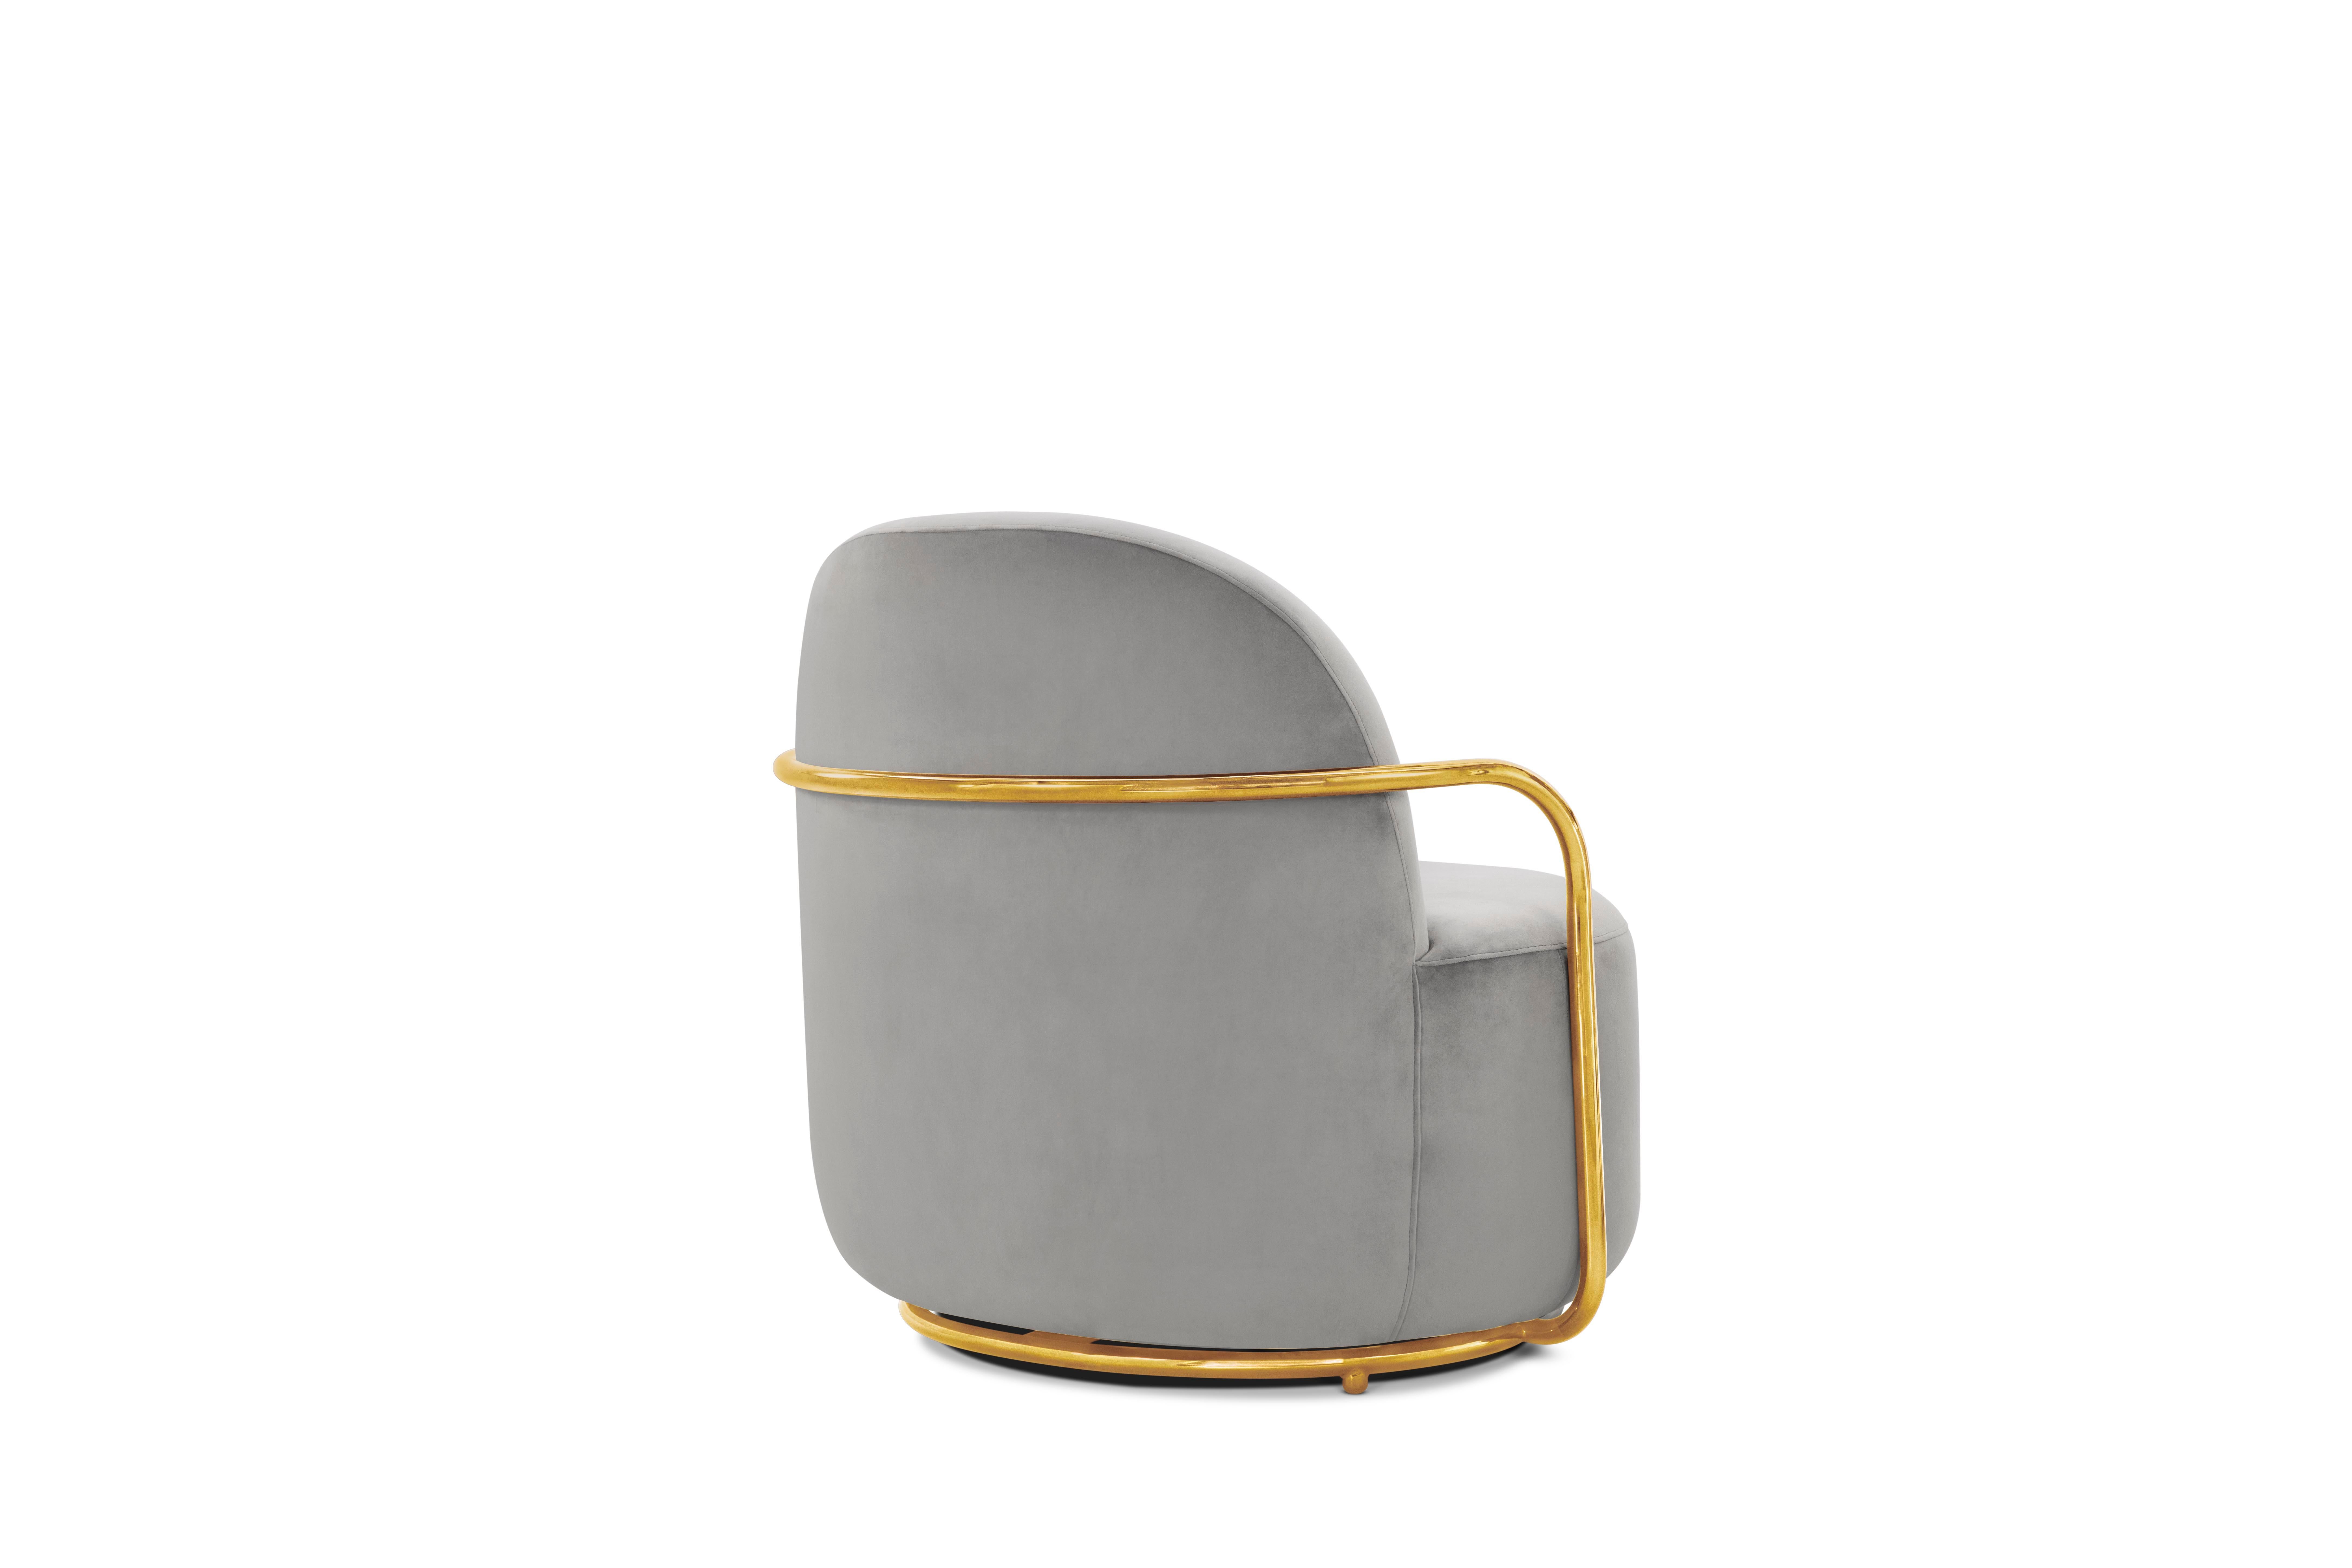 Orion Lounge Chair with Plush Gray Velvet and Gold Arms by Nika Zupanc has timeless appeal in light gray velvet and rich gold metal arms.

Nika Zupanc, a strikingly renowned Slovenian designer, never shies away from redefining the status quo of